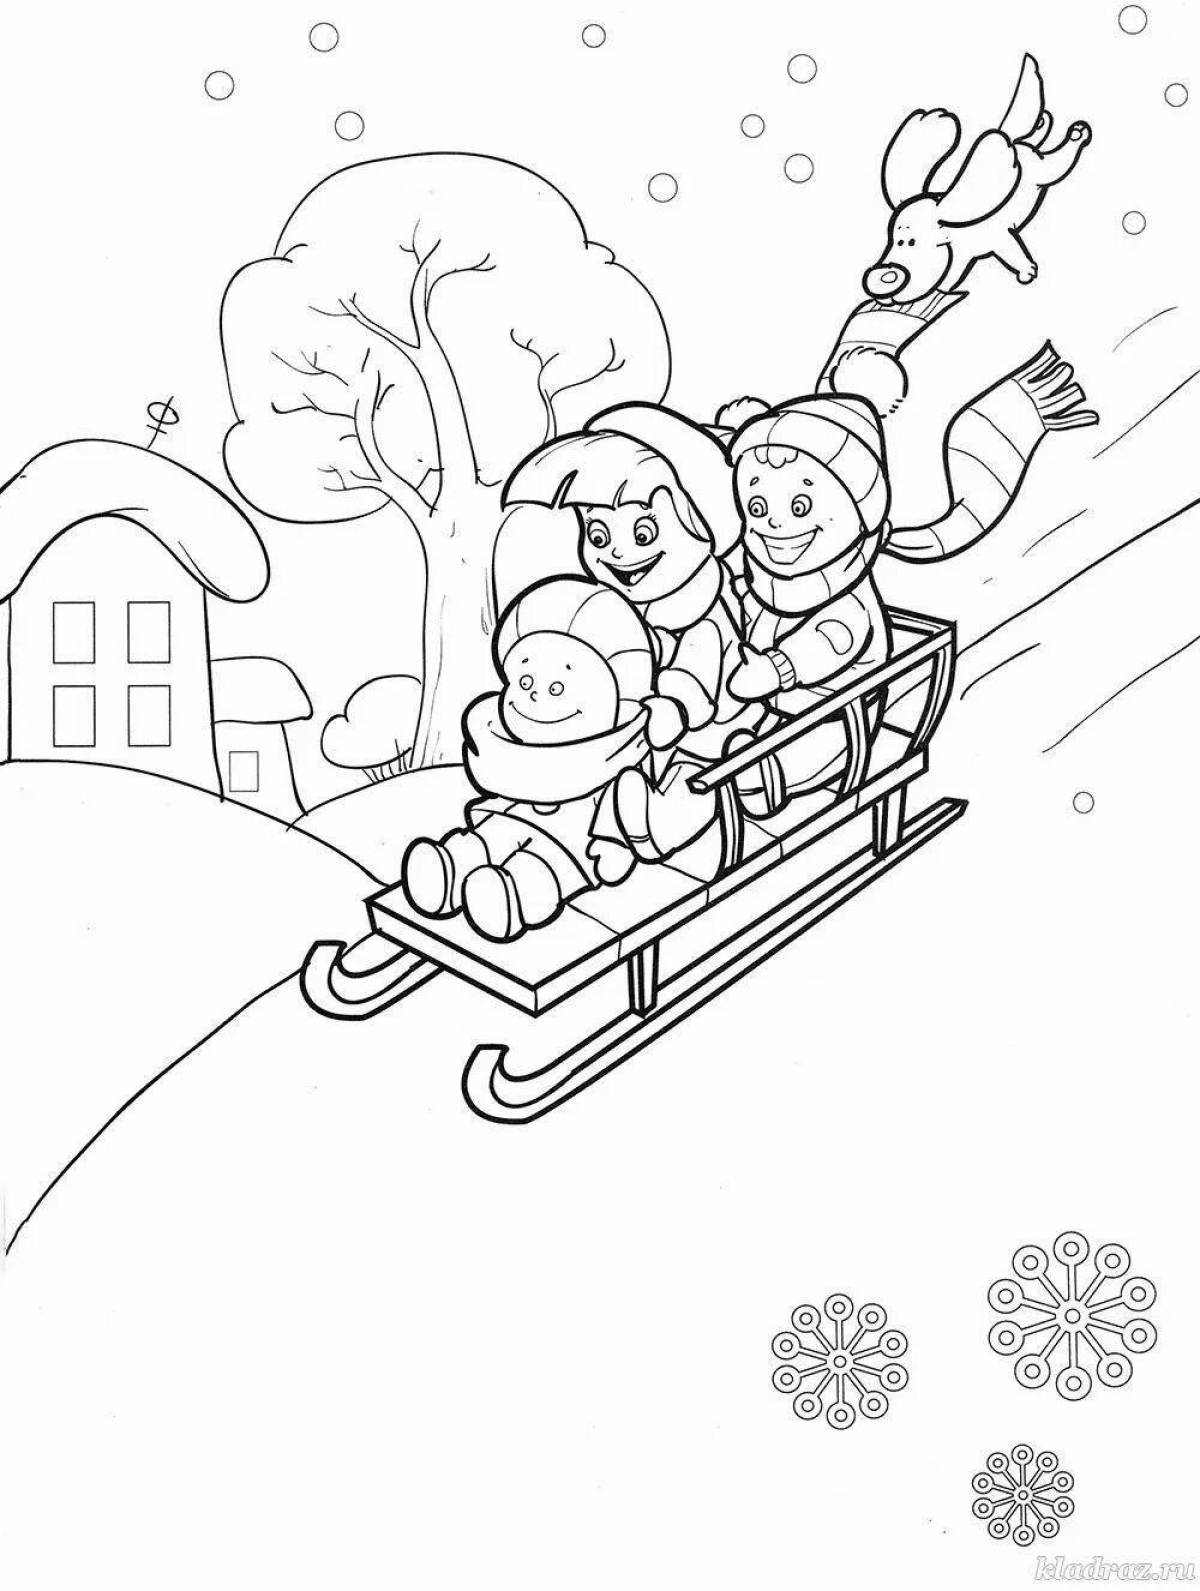 Funny children's coloring on a sled